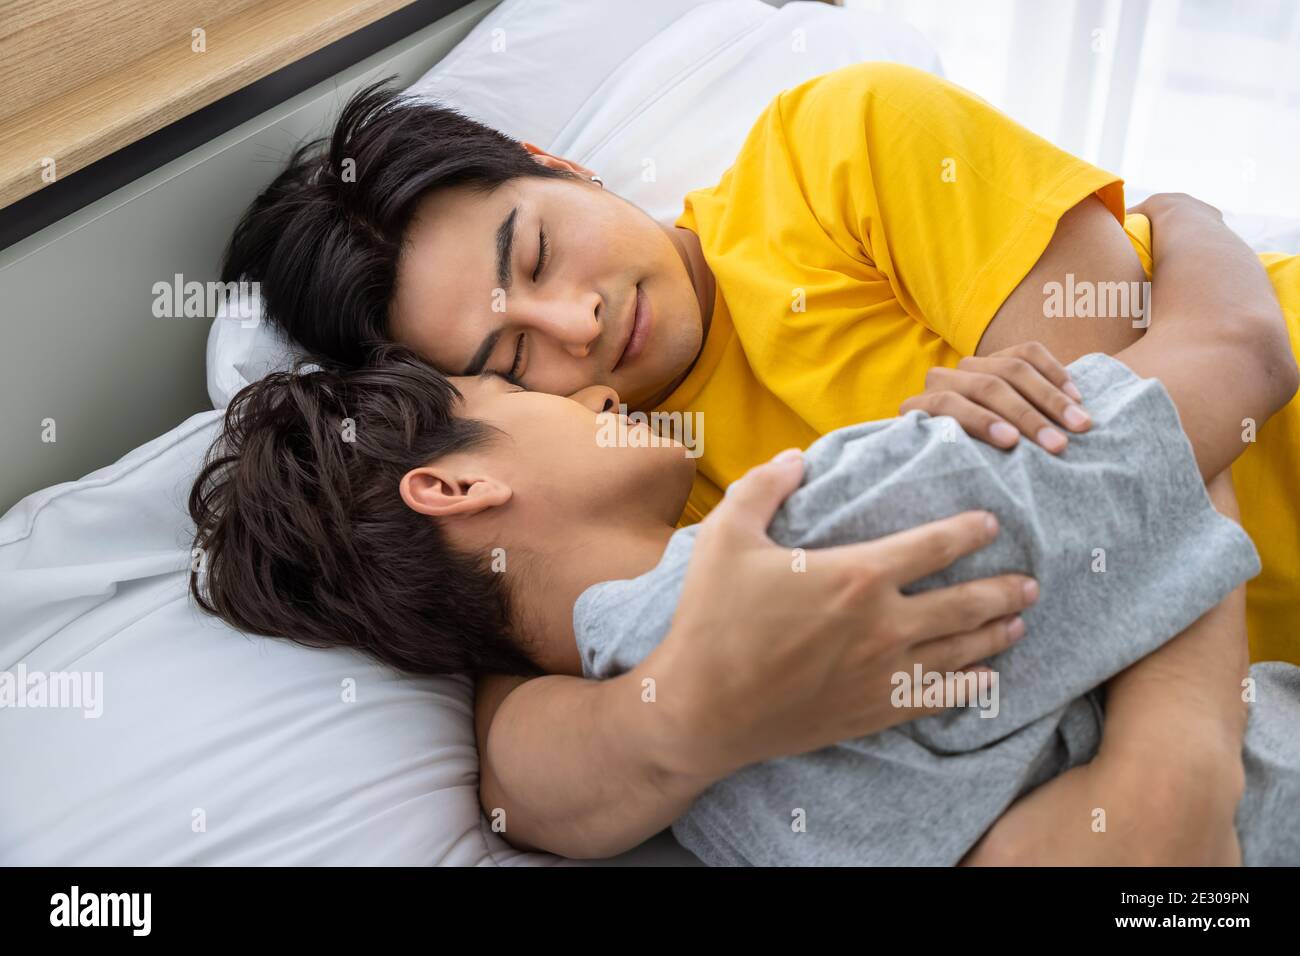 Happy Asian homosexual gay men male couple lying and embracing on bed, sleeping together. LGBT and sexual diversity concept. Stock Photo